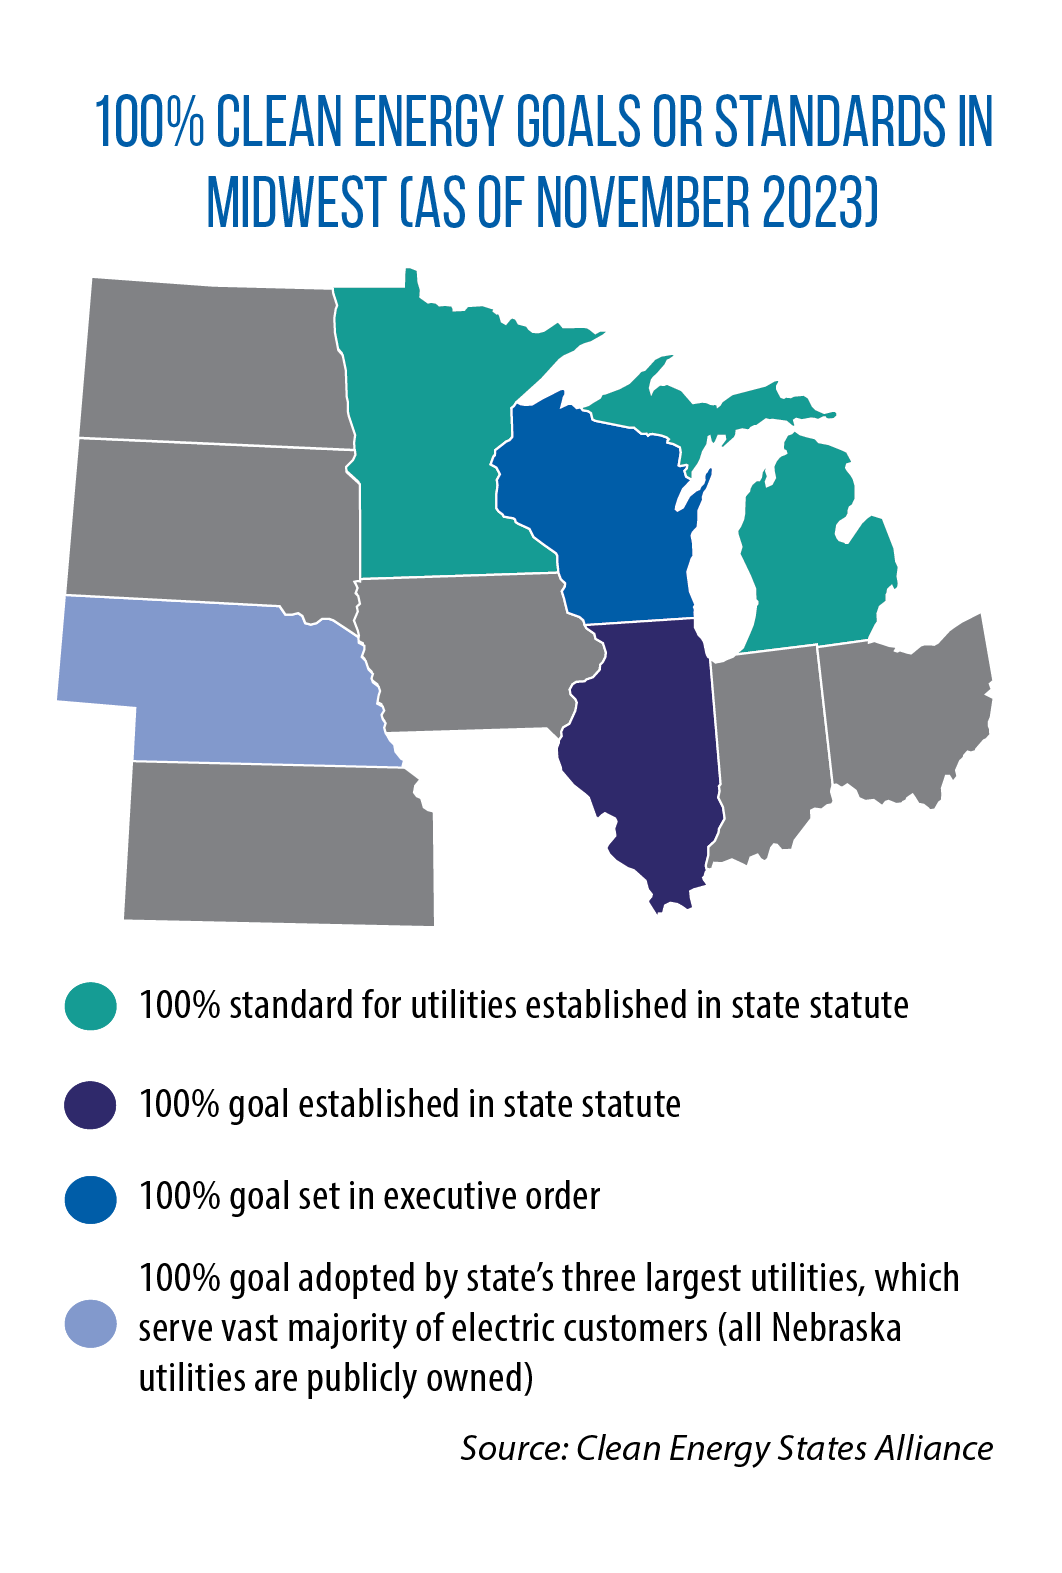 Map of Midwestern states with 100 percent clean energy goals or standards as of November 2023